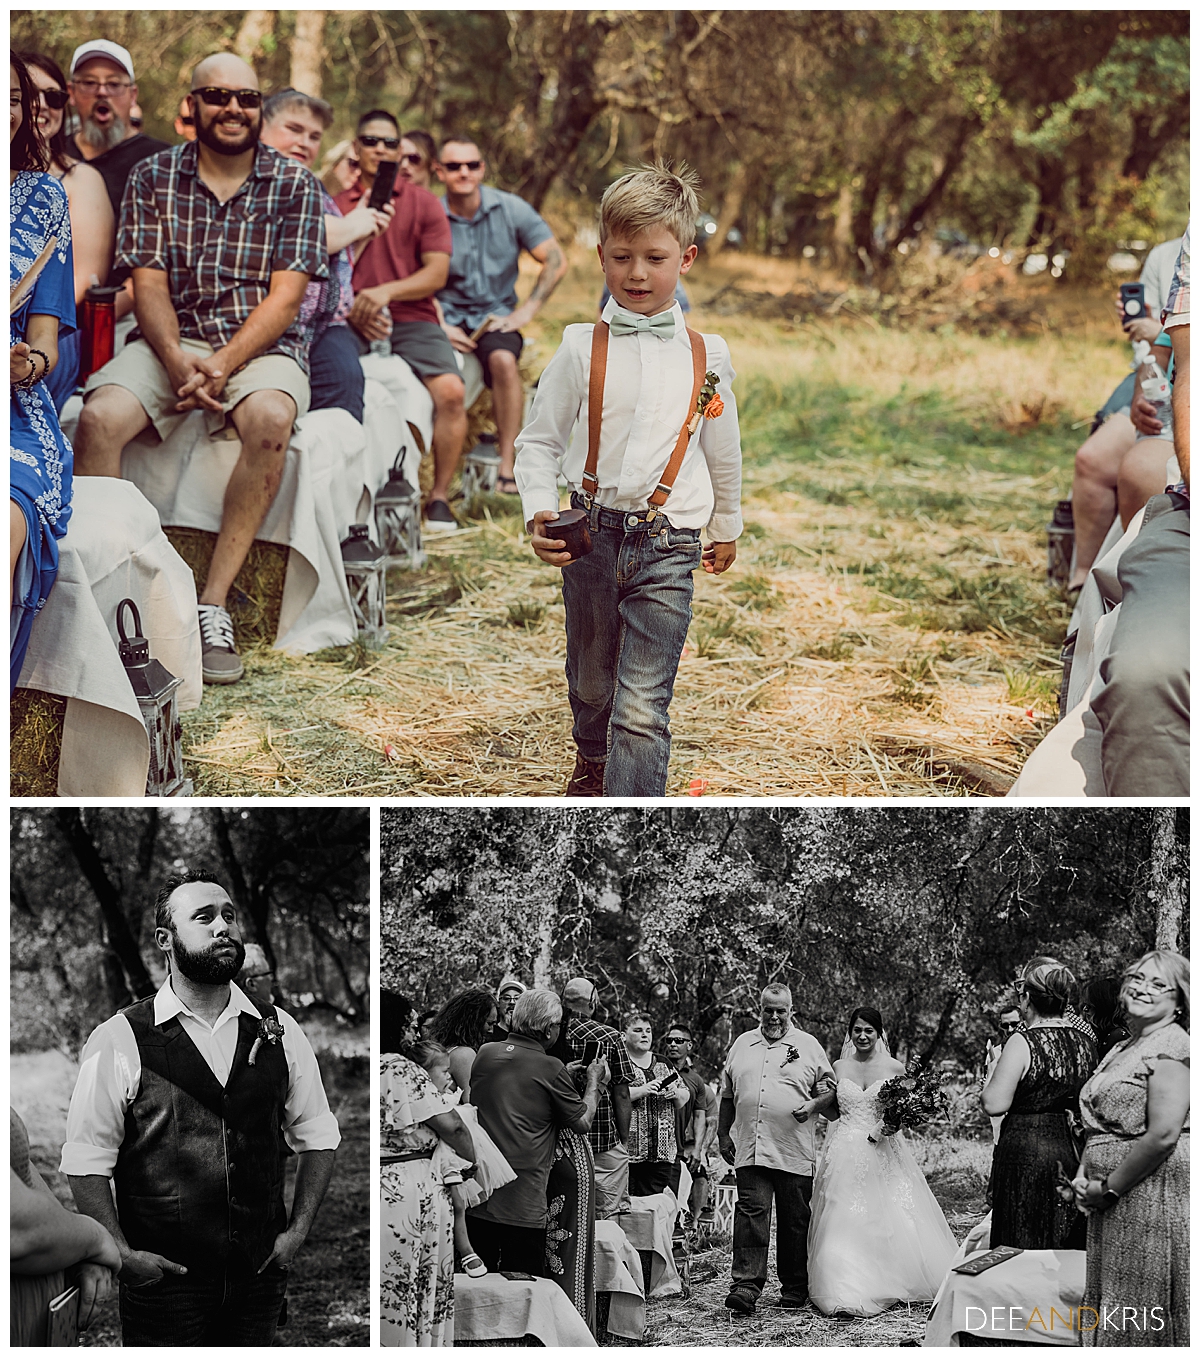 Three images of the wedding processional of ring bearer, groom trying not to cry, and bride being escorted by her father down the aisle.